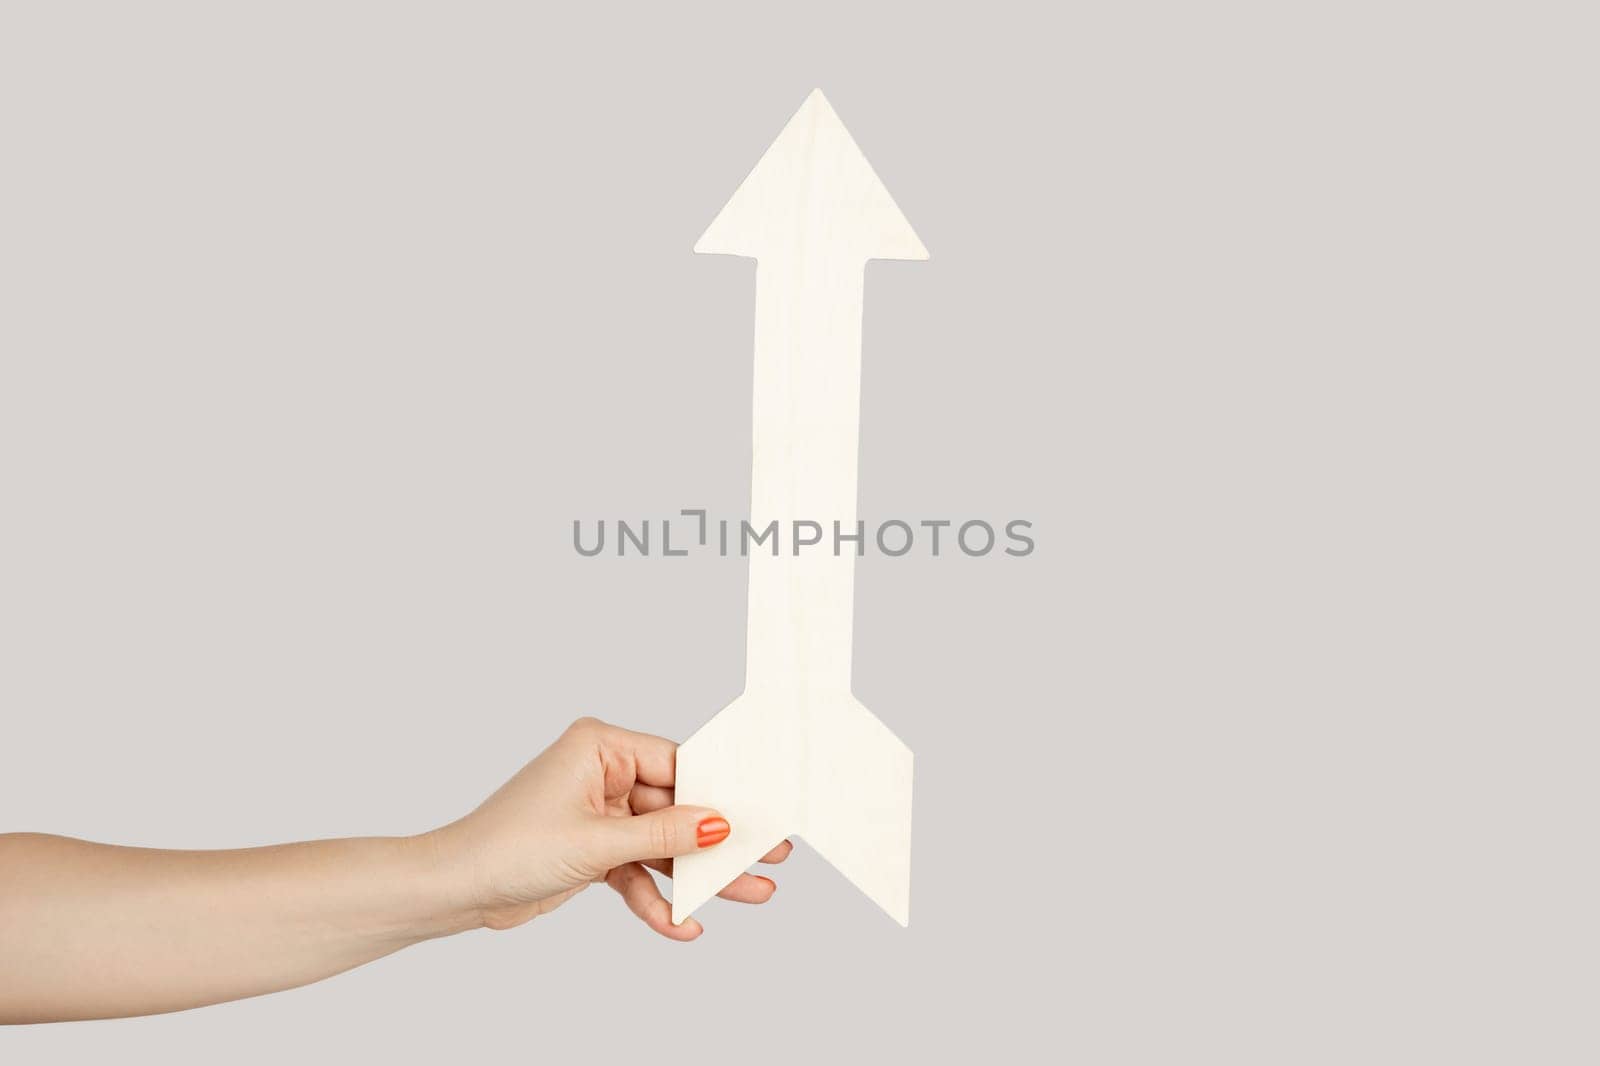 Closeup of woman hand holding white arrow indicating direction upwards, symbol of increase. Indoor studio shot isolated on gray background.